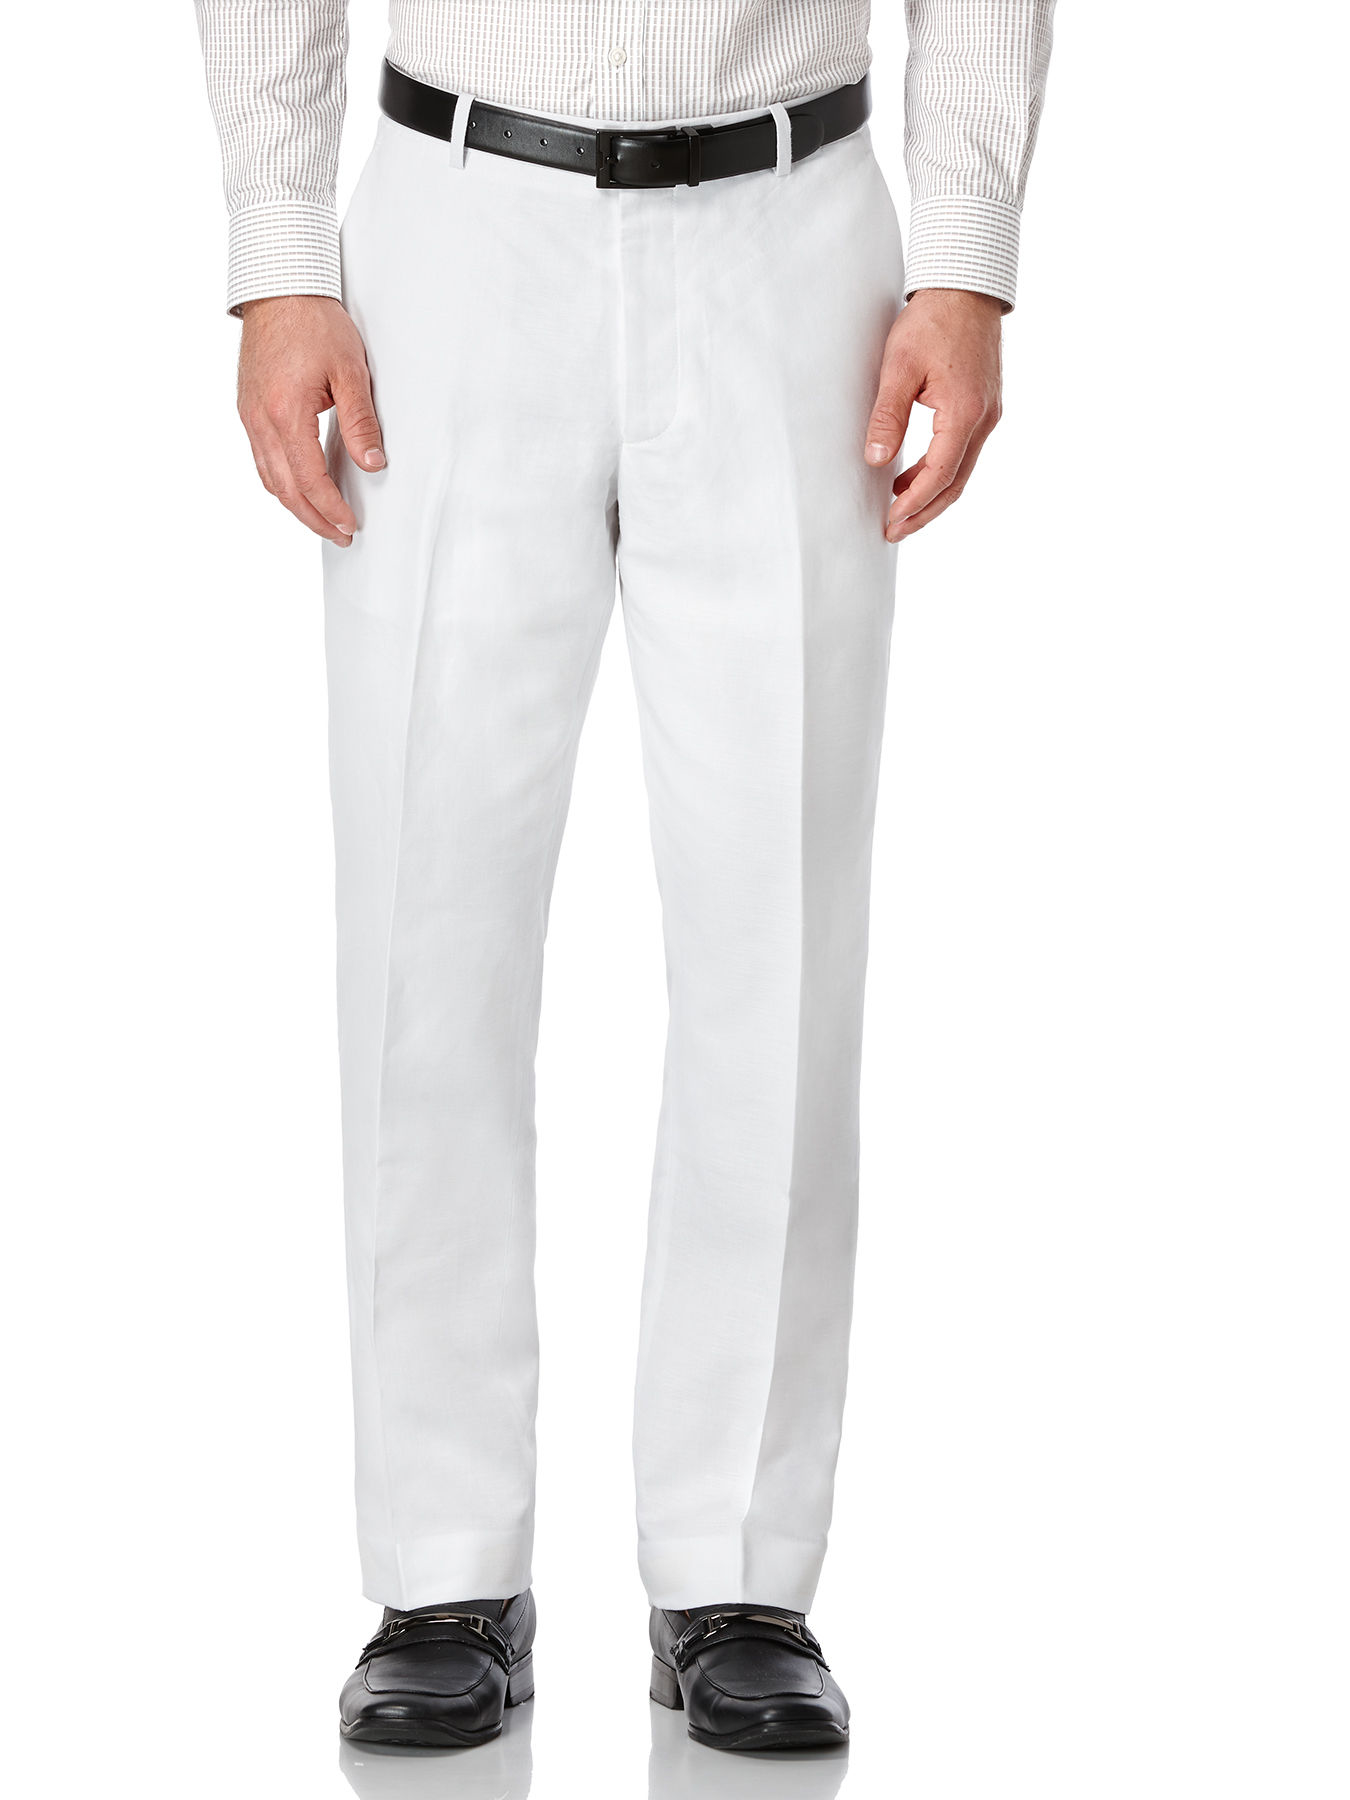 Perry ellis Big And Tall Linen Twill Suit Pant in White for Men (Bright ...